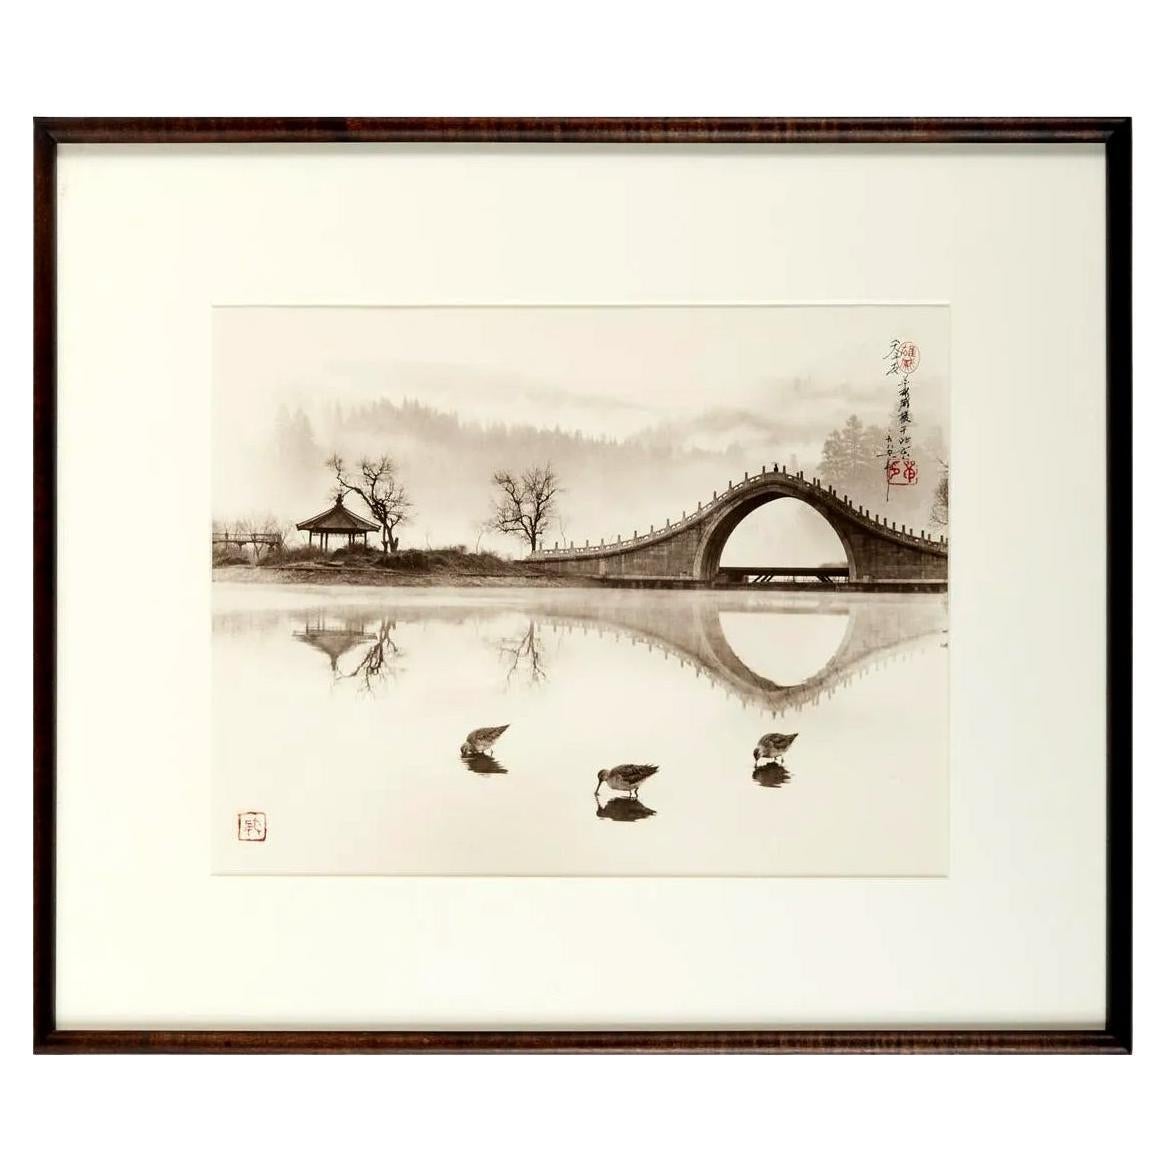 Framed Photograph by Don Hong-Oai For Sale